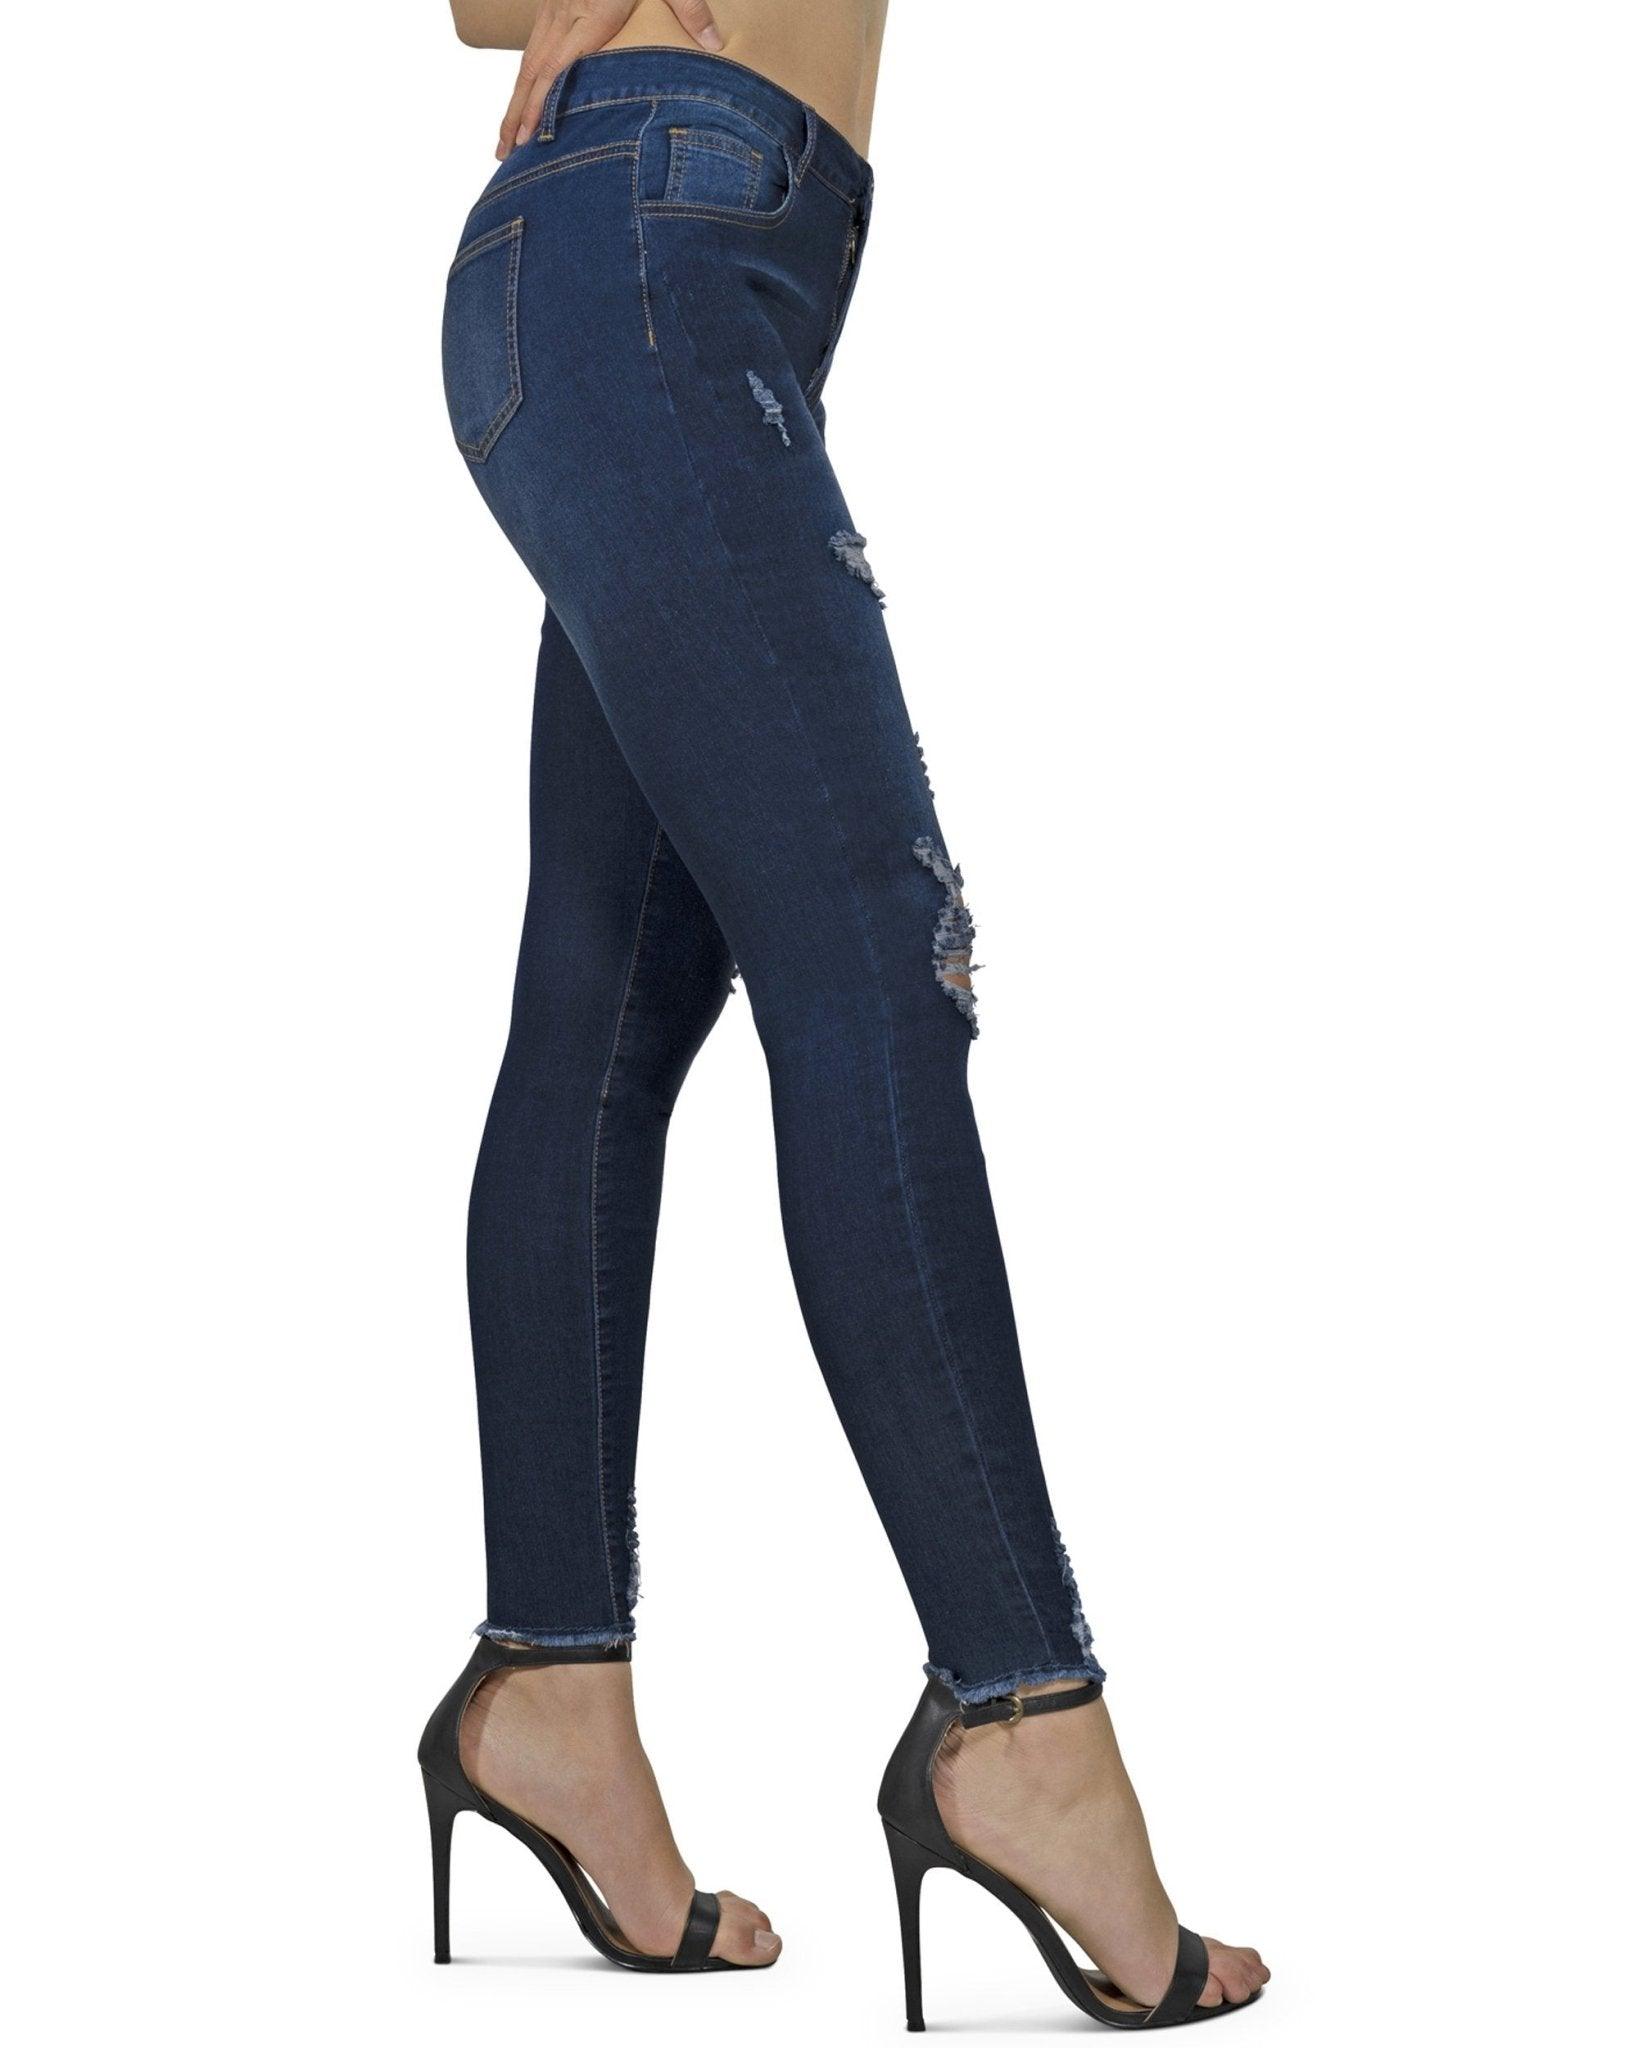 Arden Distressed Skinny Jeans - Lacatang Market